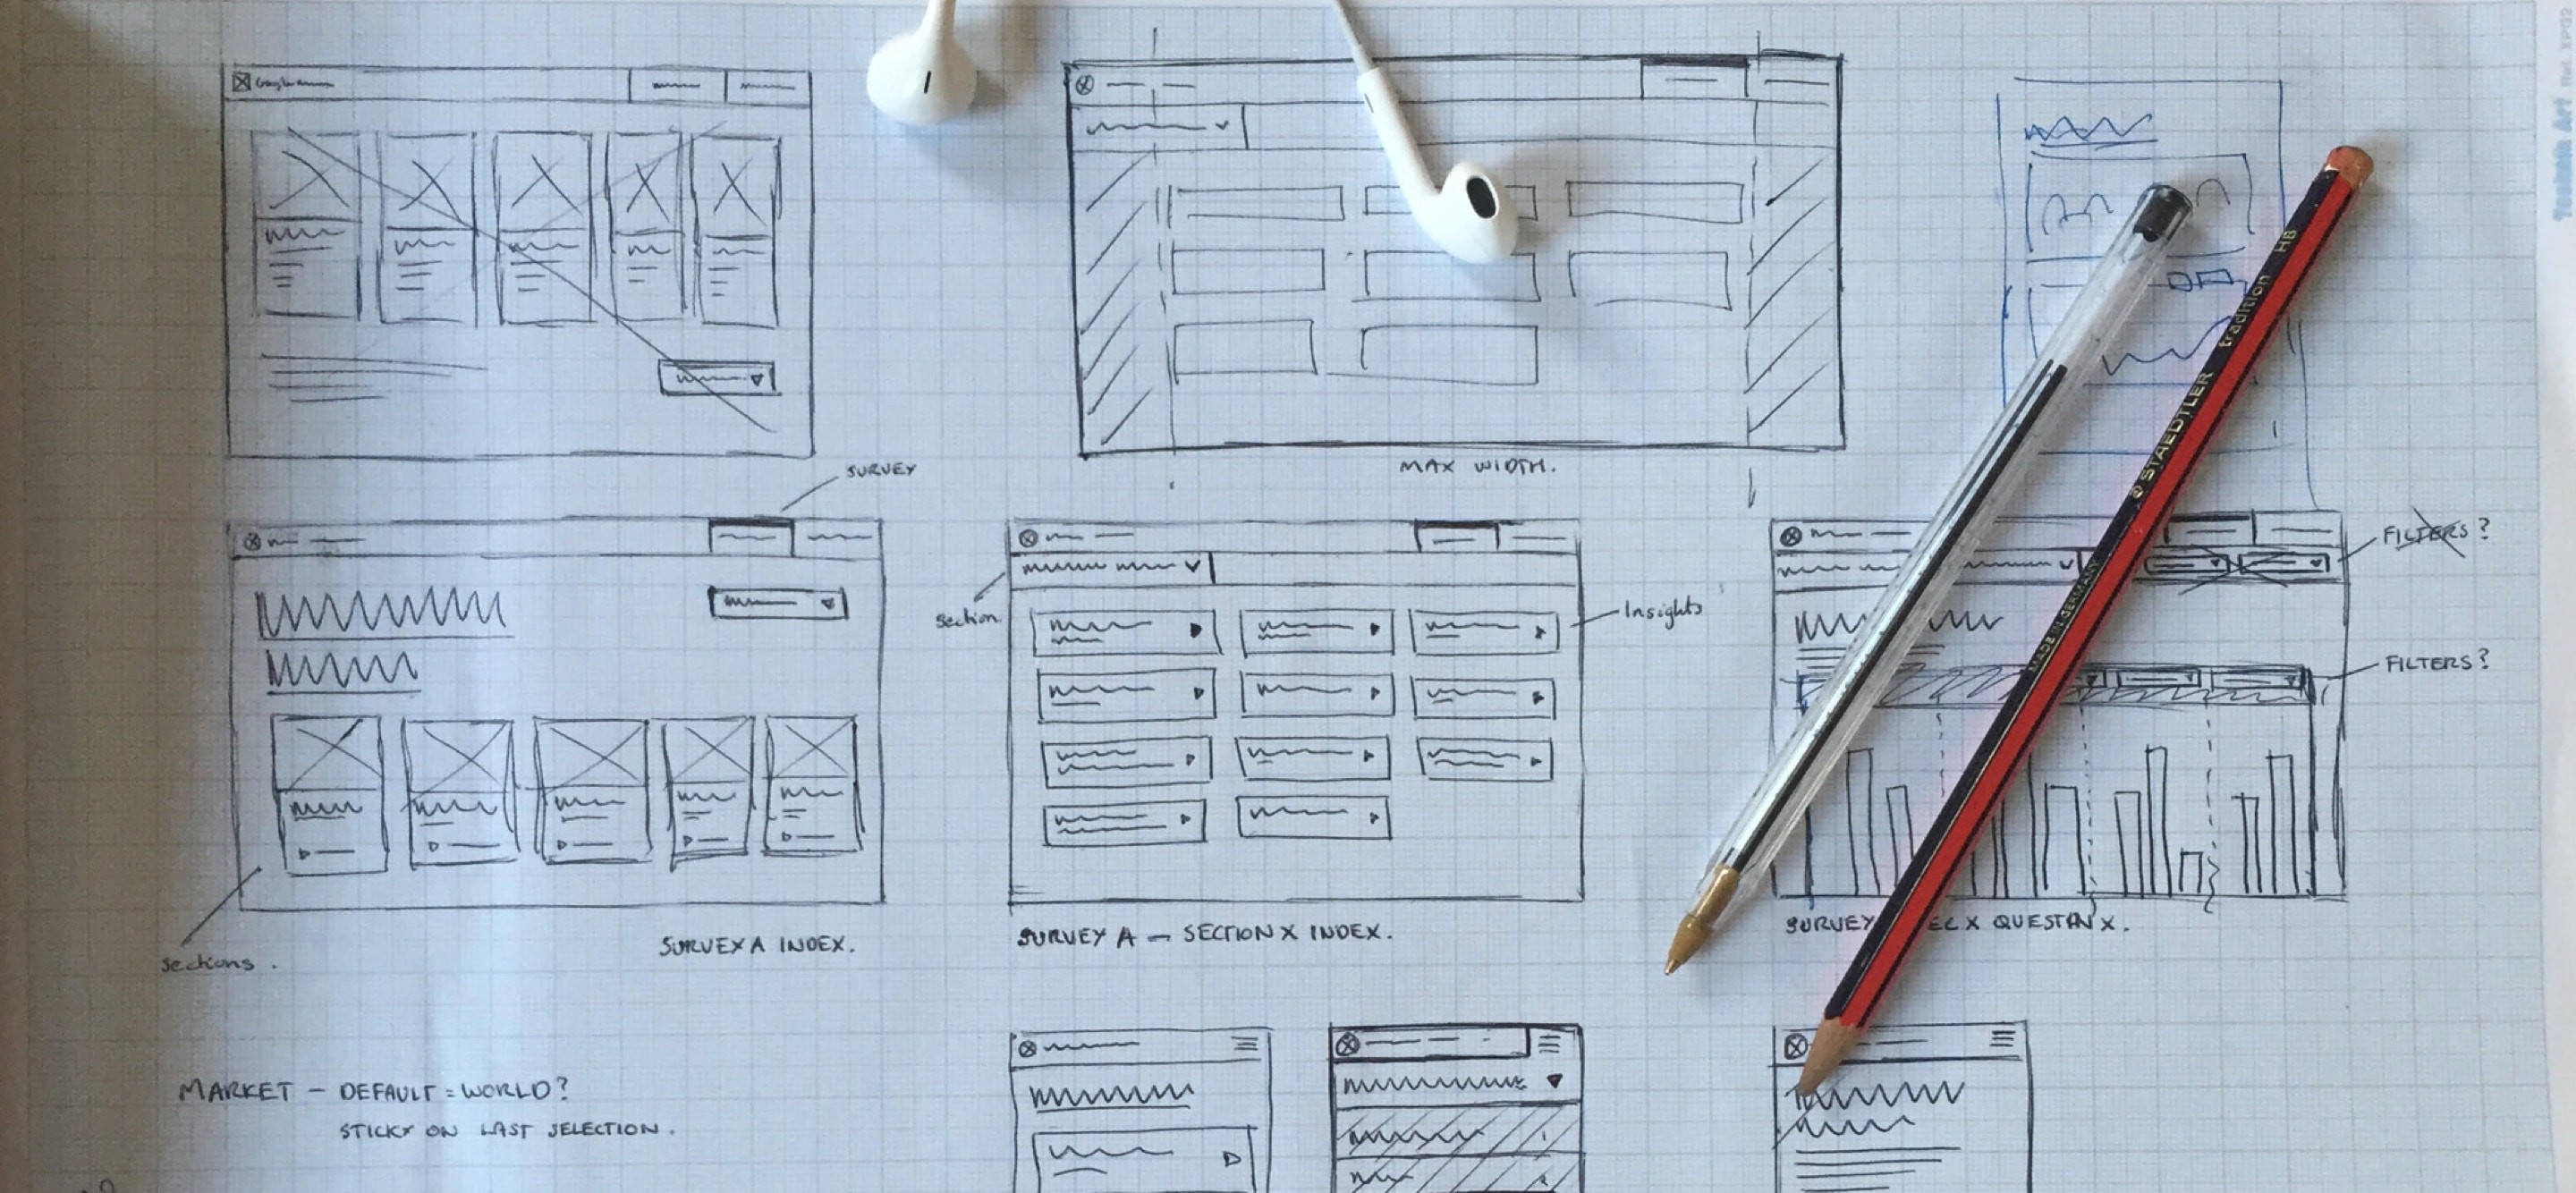 Snapshot from our early stage UX designs using sketches on graph paper